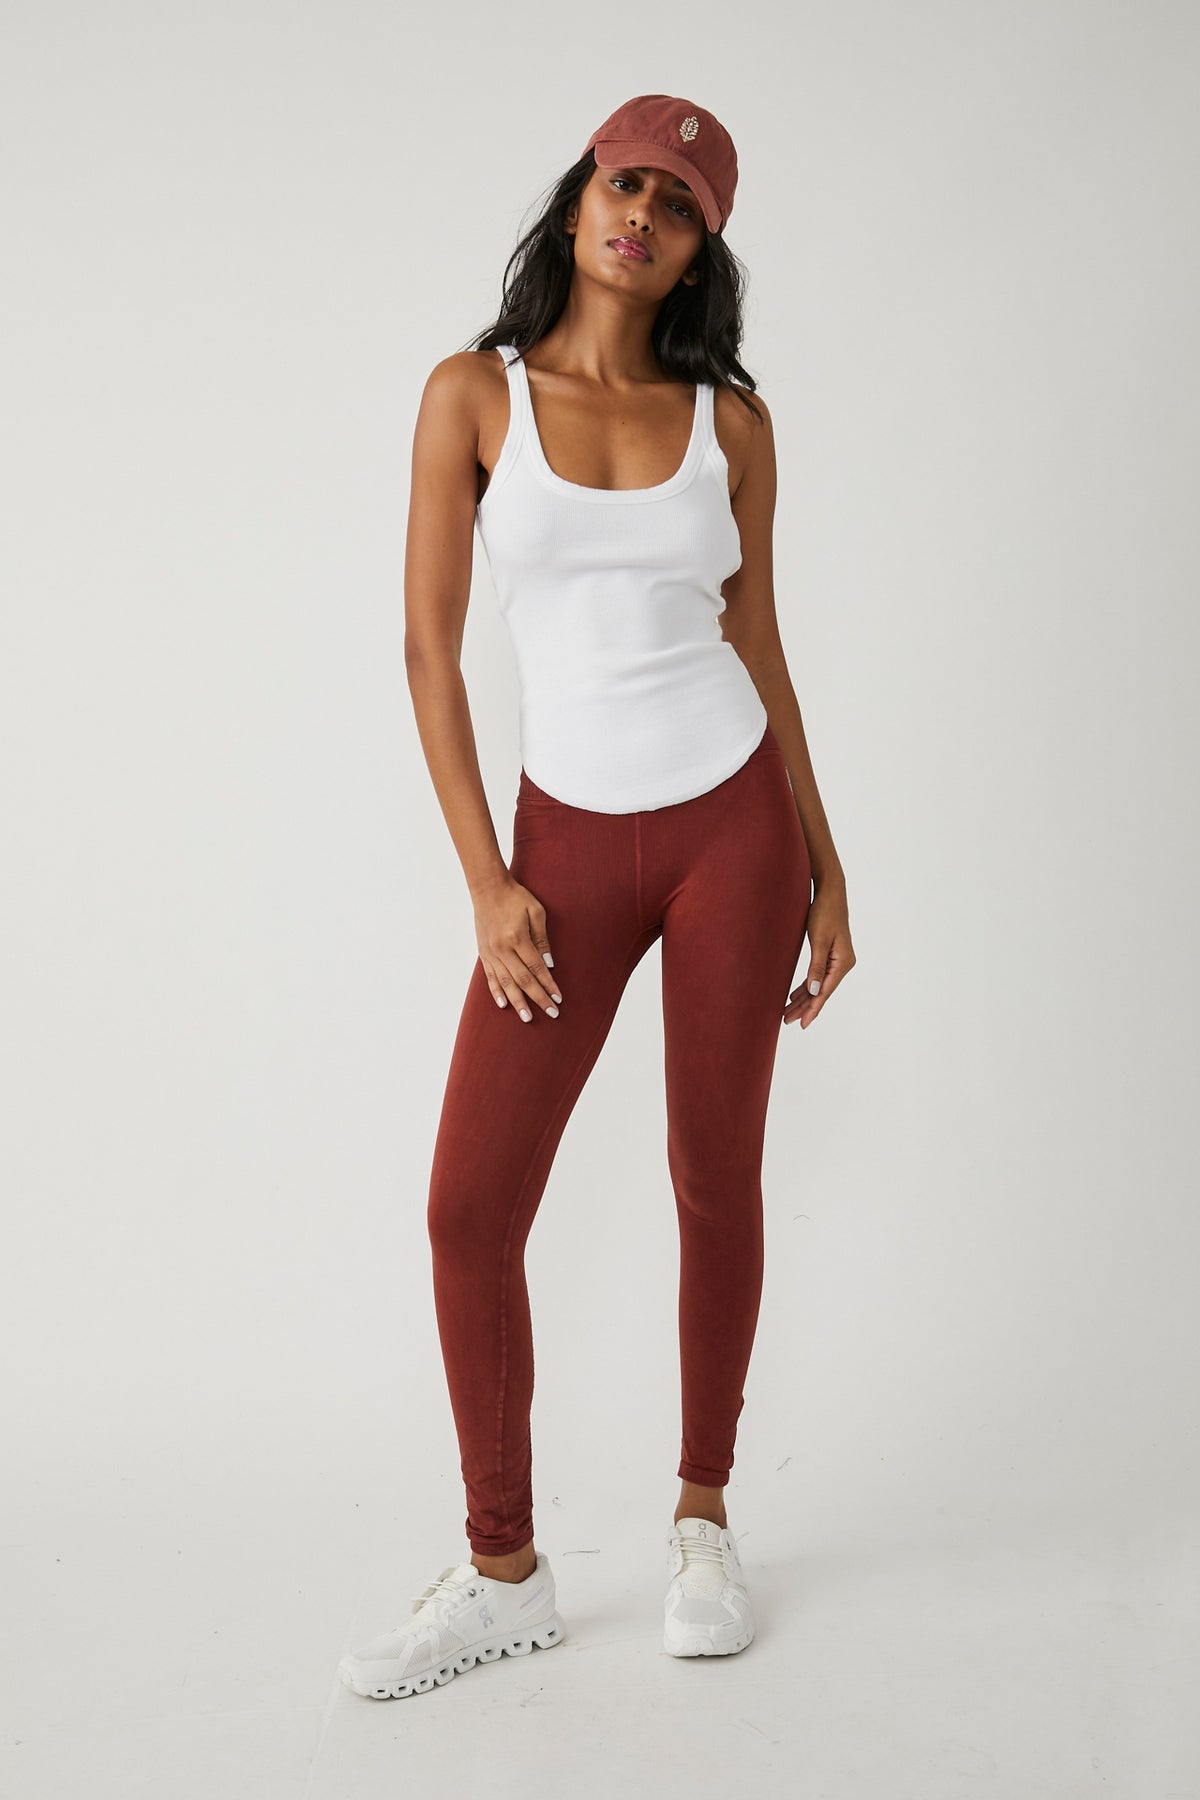 Free People Movement High-Rise Good Karma Leggings, All Colors $78, SS-070